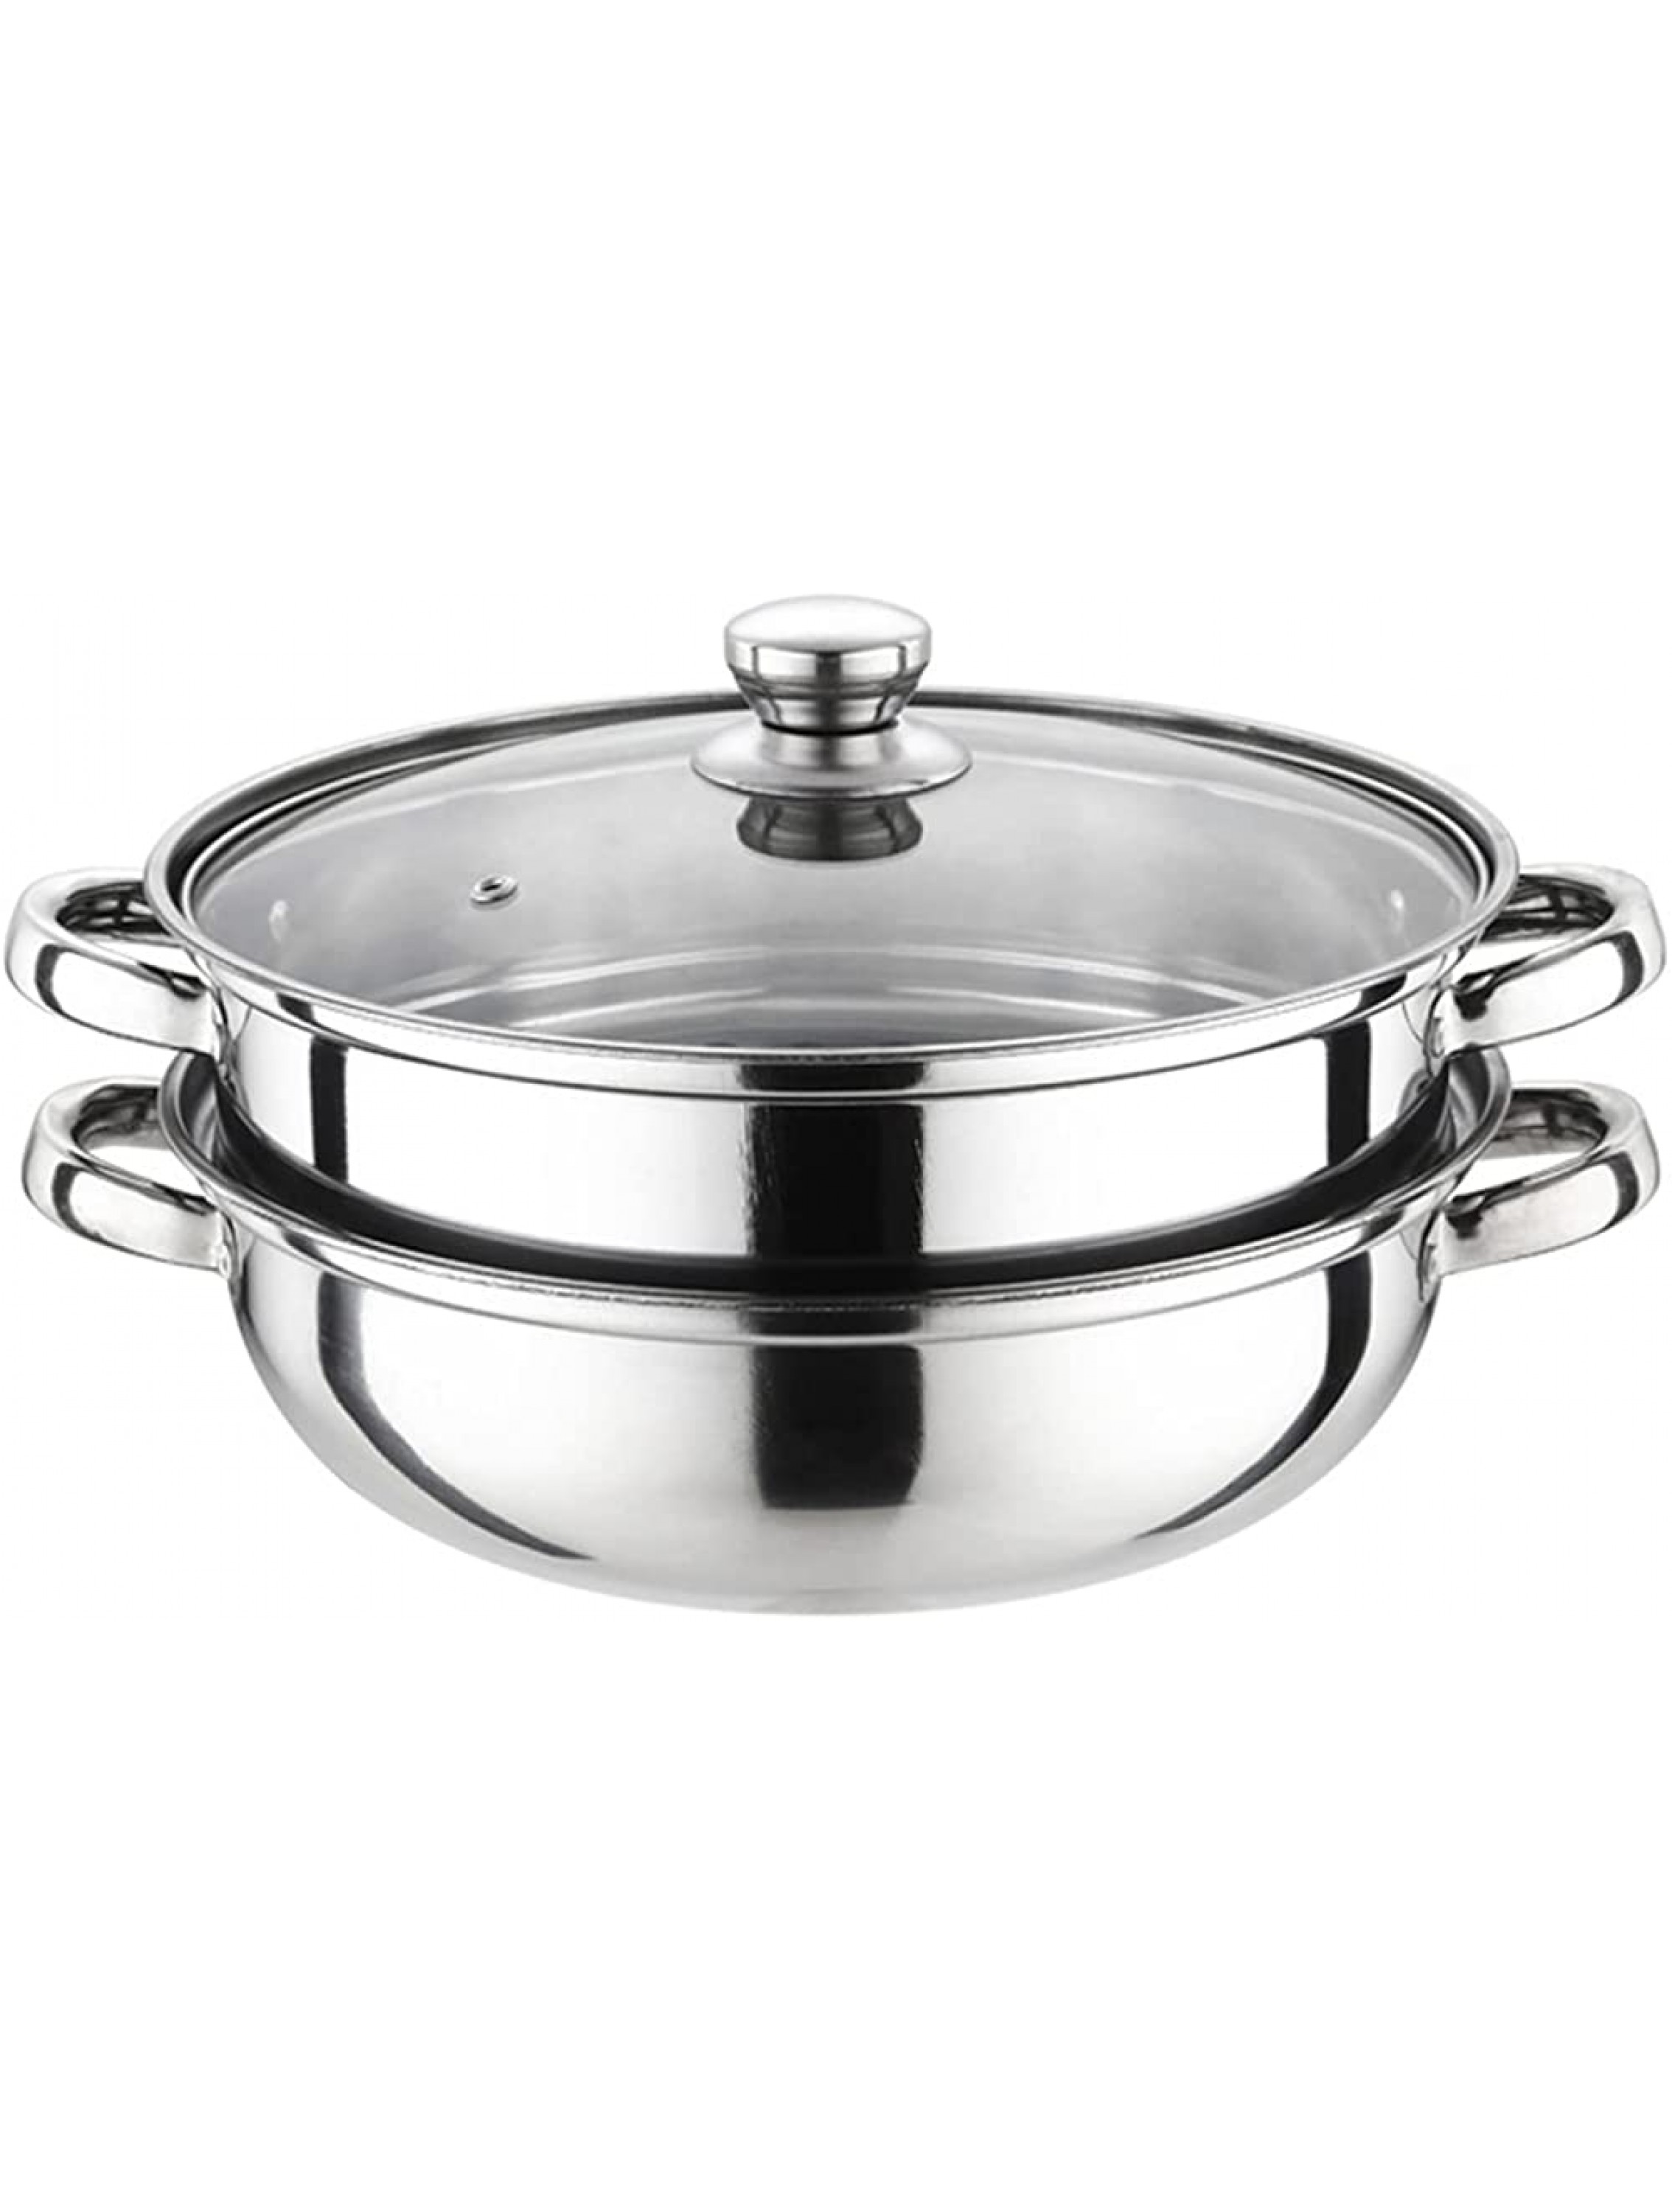 2 Piece Stainless Steel Steamer Pot Set with Glass Lid and handle,for Steamer Cooking,Casserole,Saucepan 2 layer - B5UBKKRZB